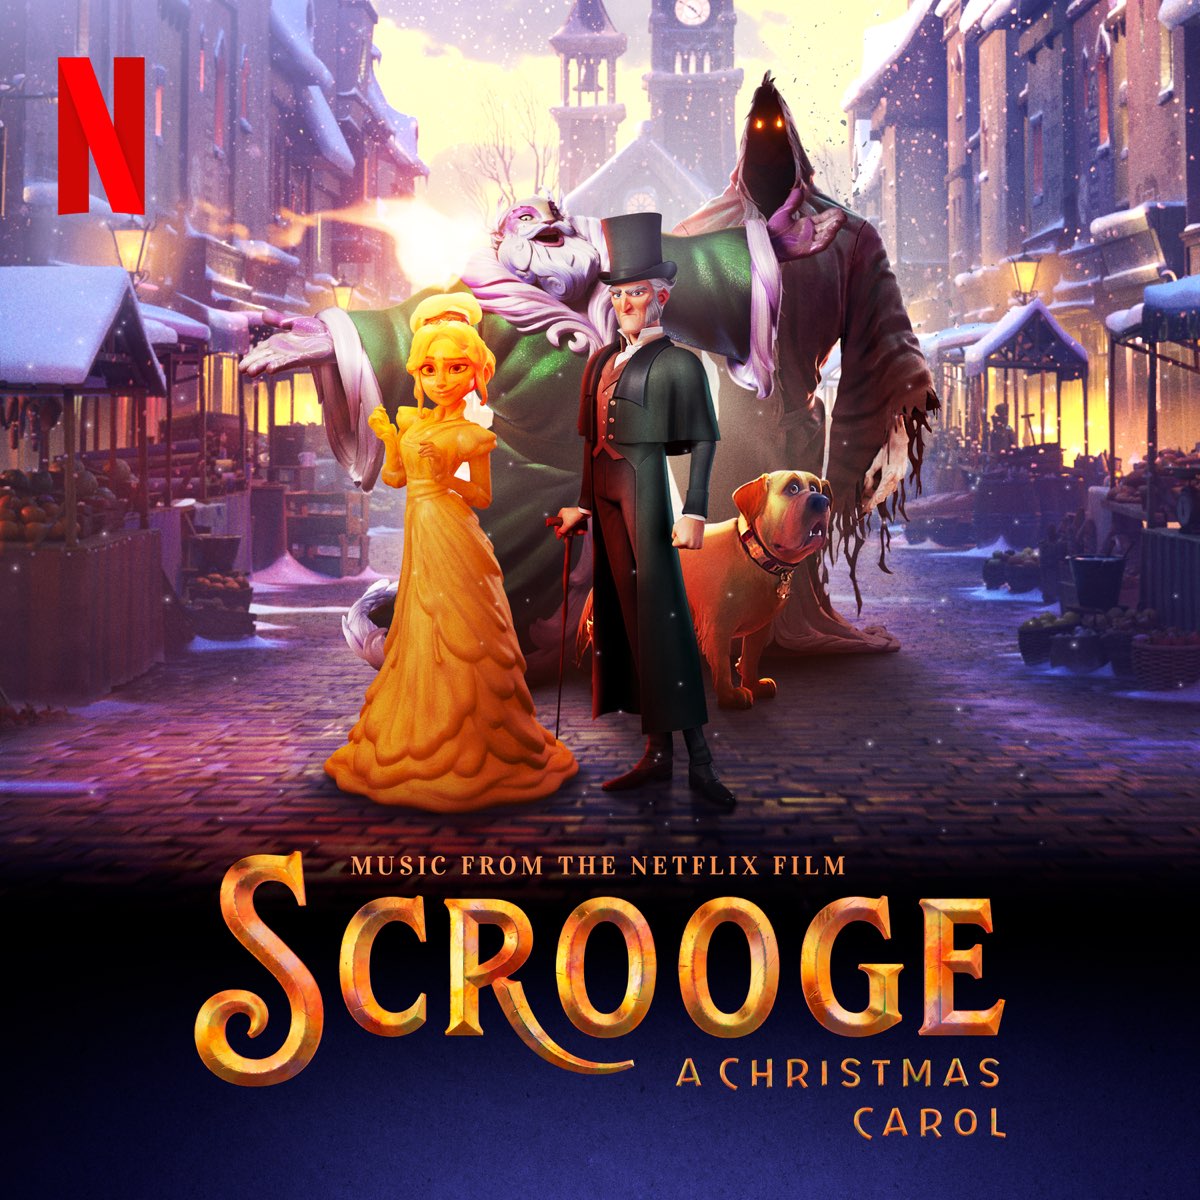 ‎Scrooge A Christmas Carol (Music from the Netflix Film) by Various